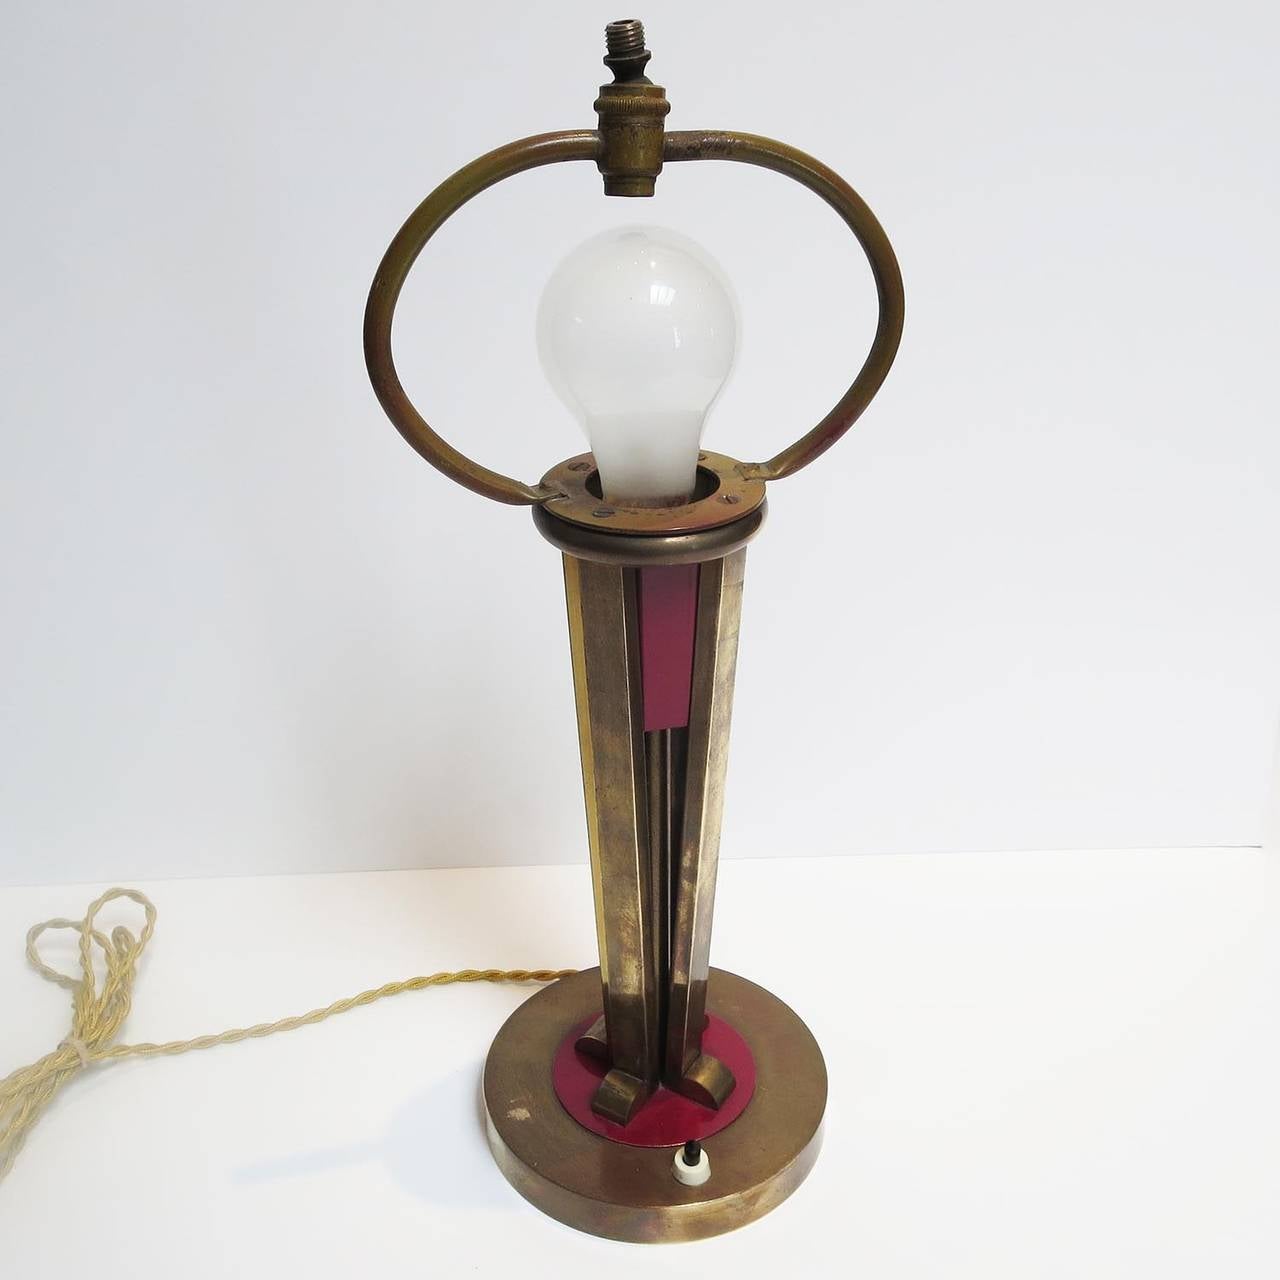 Painted Stylish French Art Deco Table Lamp in Brass and Enamel